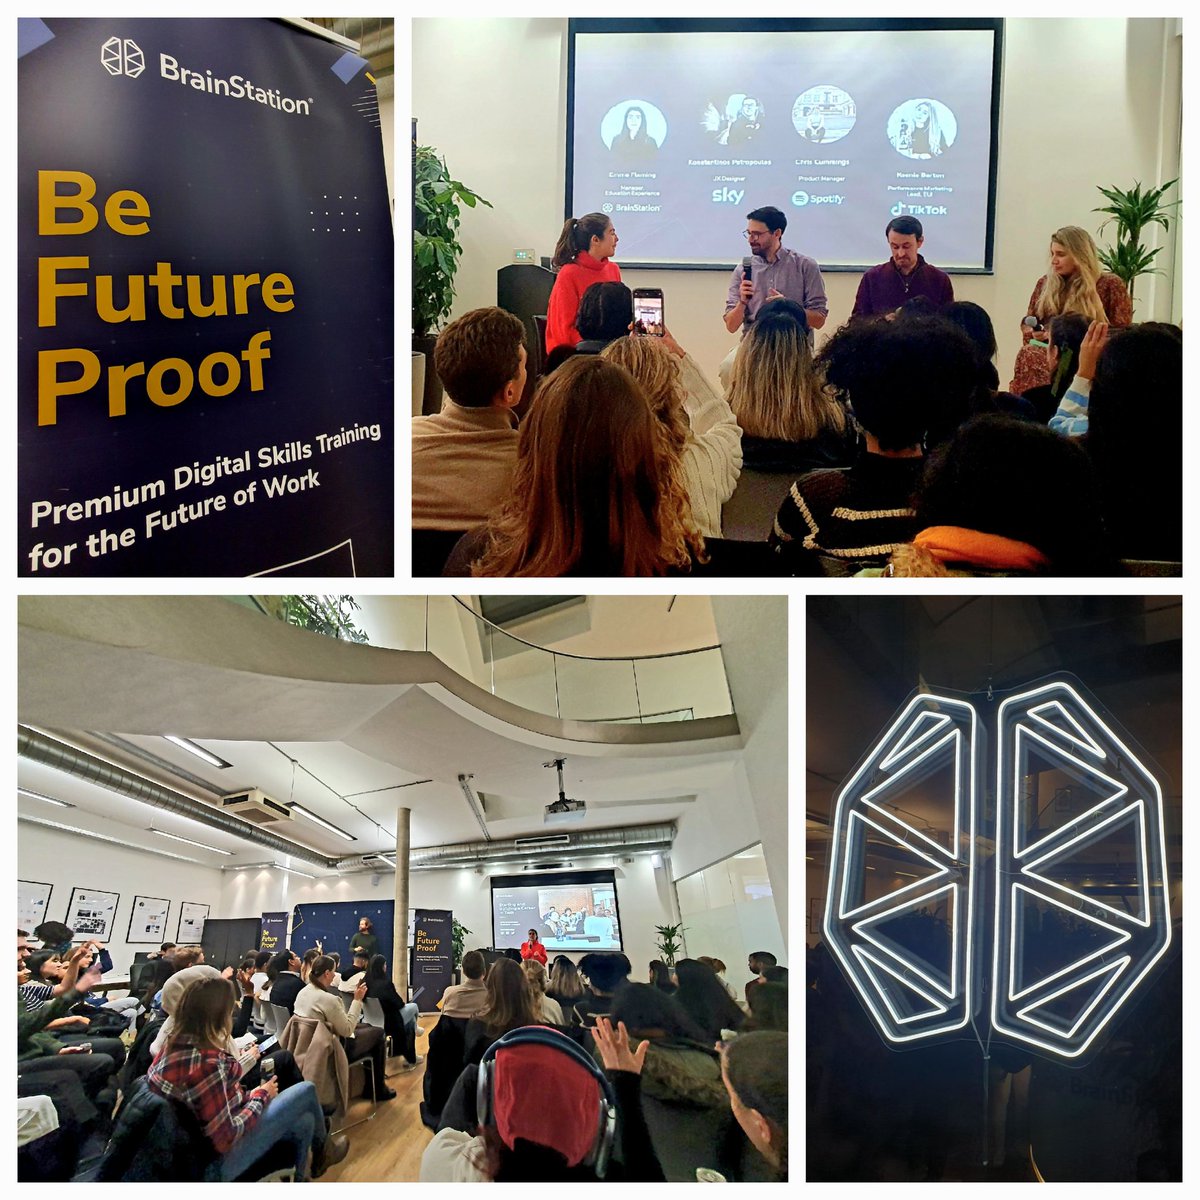 'Can #UXdesign play a role in the VR/XR revolution?' That's what we asked ourselves @BrainStation first event of 2024! 🚀 Incredible speakers and engaging audience questions. Thanks to all the contrbutors. Let's shape the future together! #VR4Health #TechForGood #UXDesignImpact